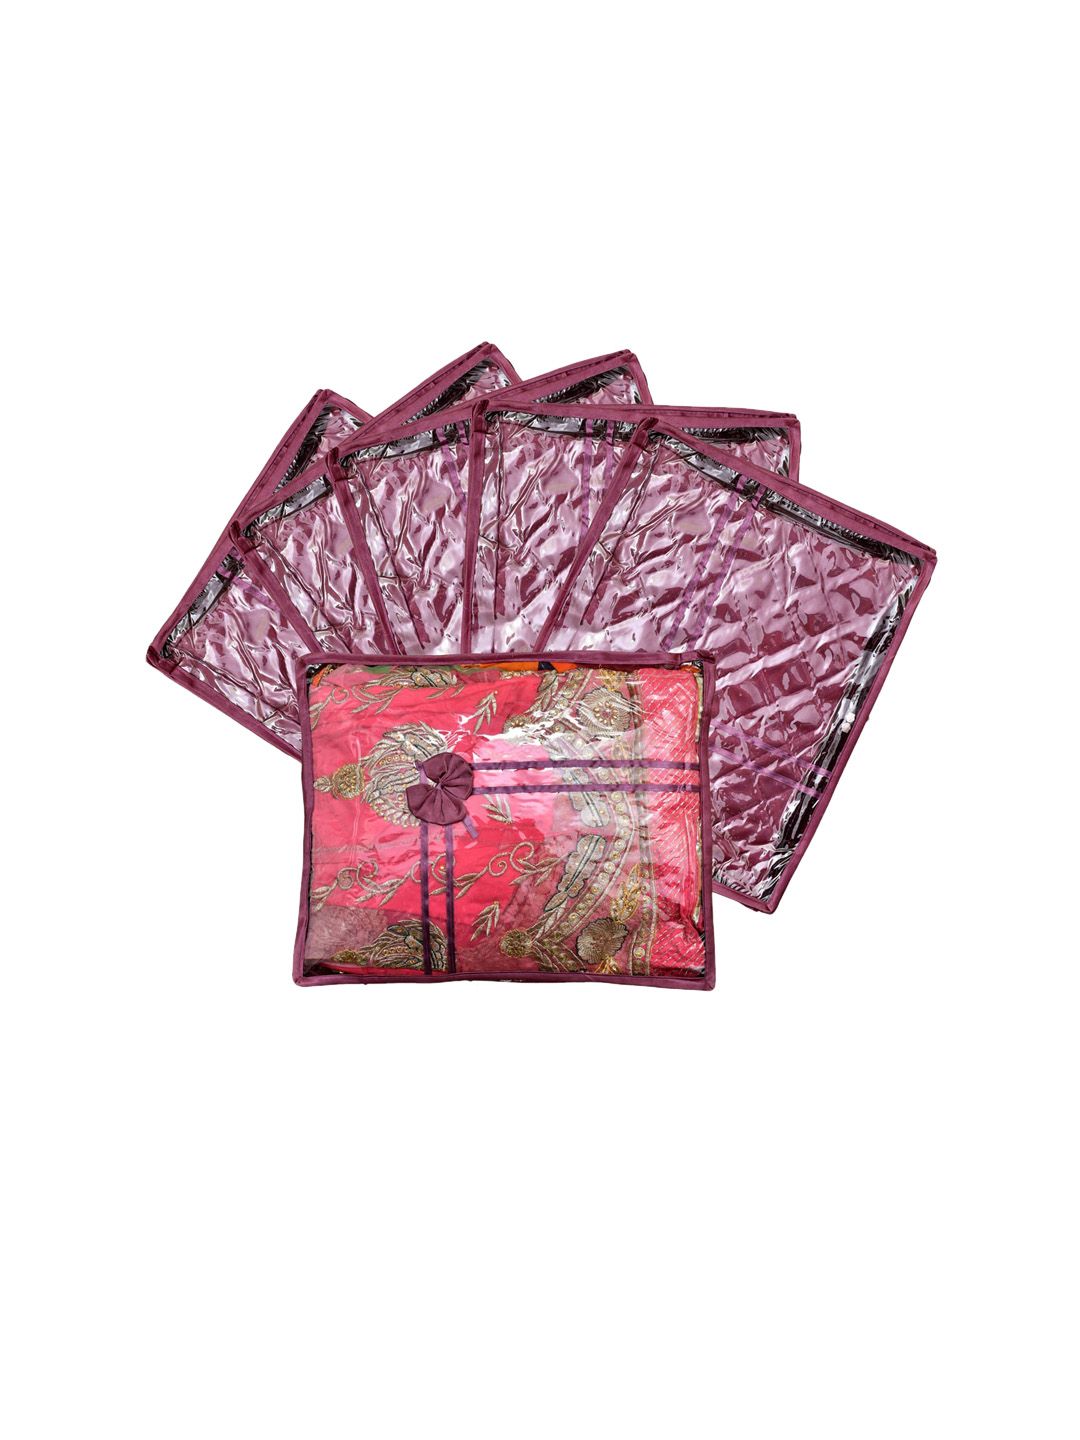 Kuber Industries Set Of 6 Purple & Transparent Solid Single Packing Saree Cover Organizers Price in India